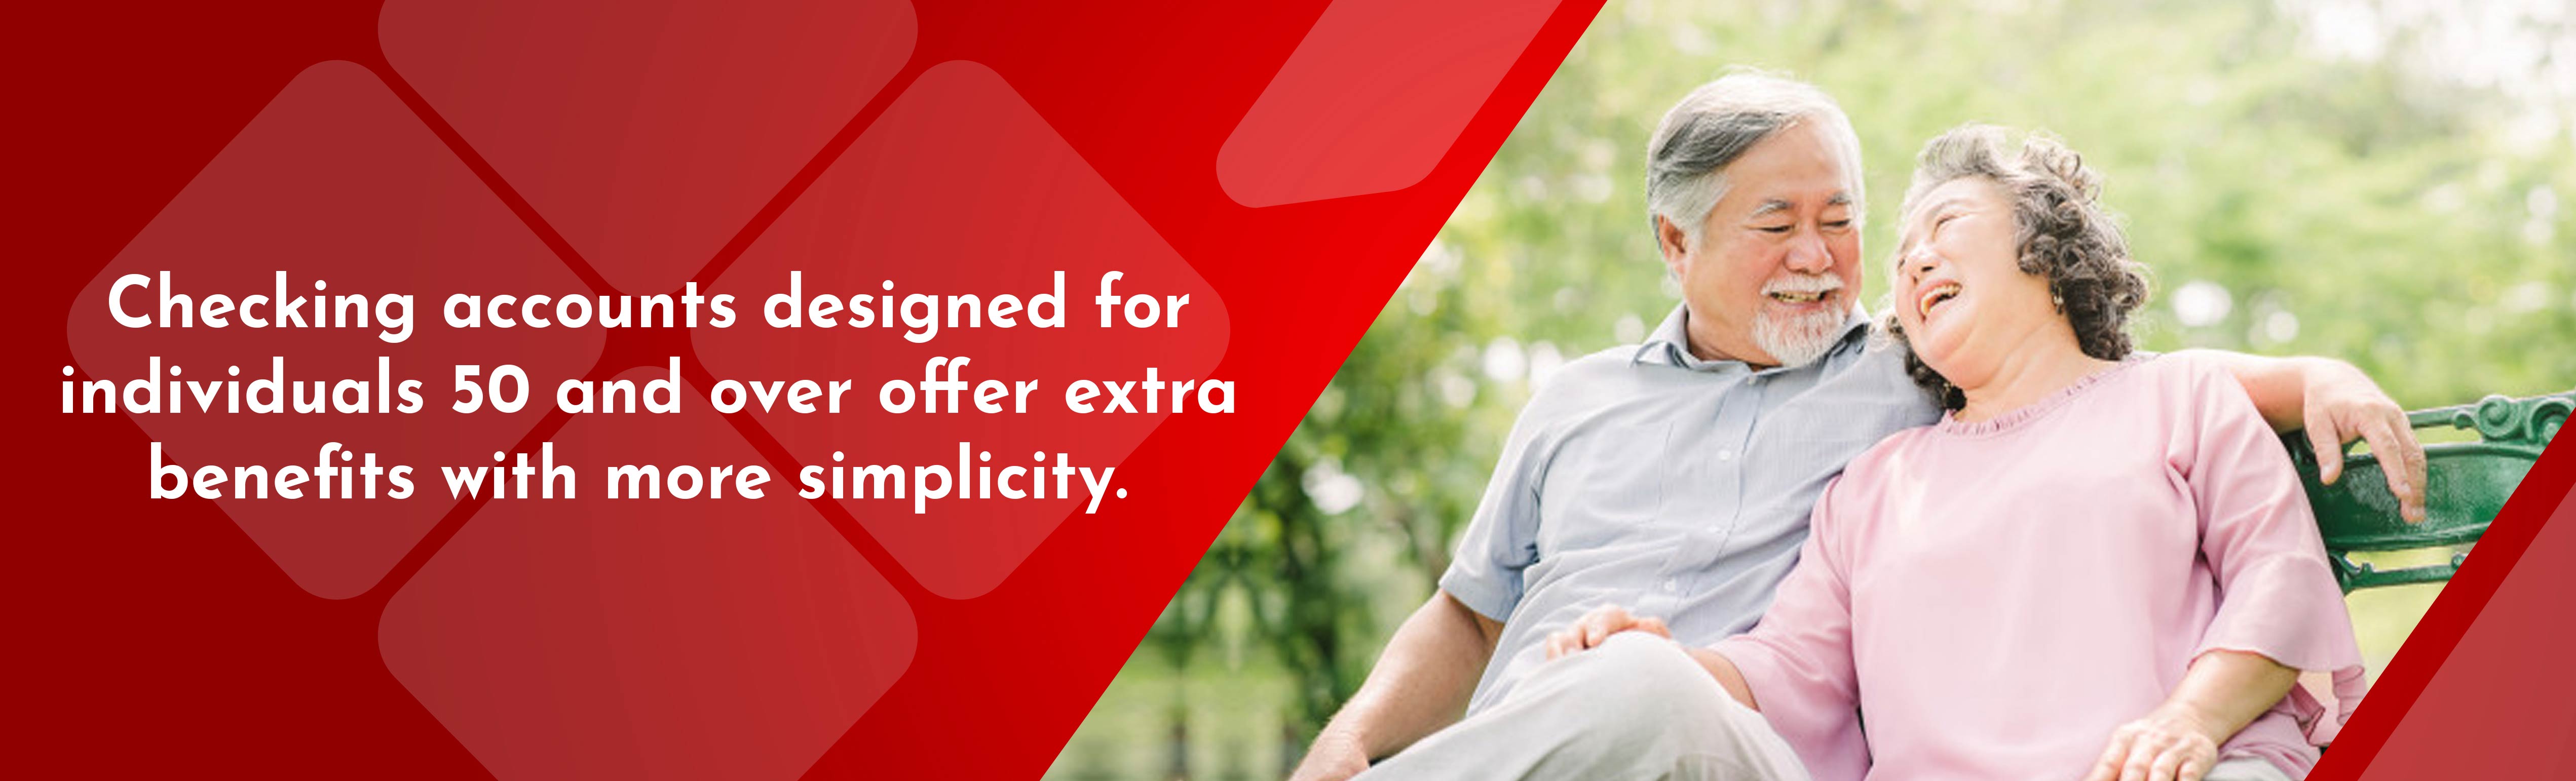 Checking accounts designed for individuals 50 and over offer extra benefits with more simplicity.